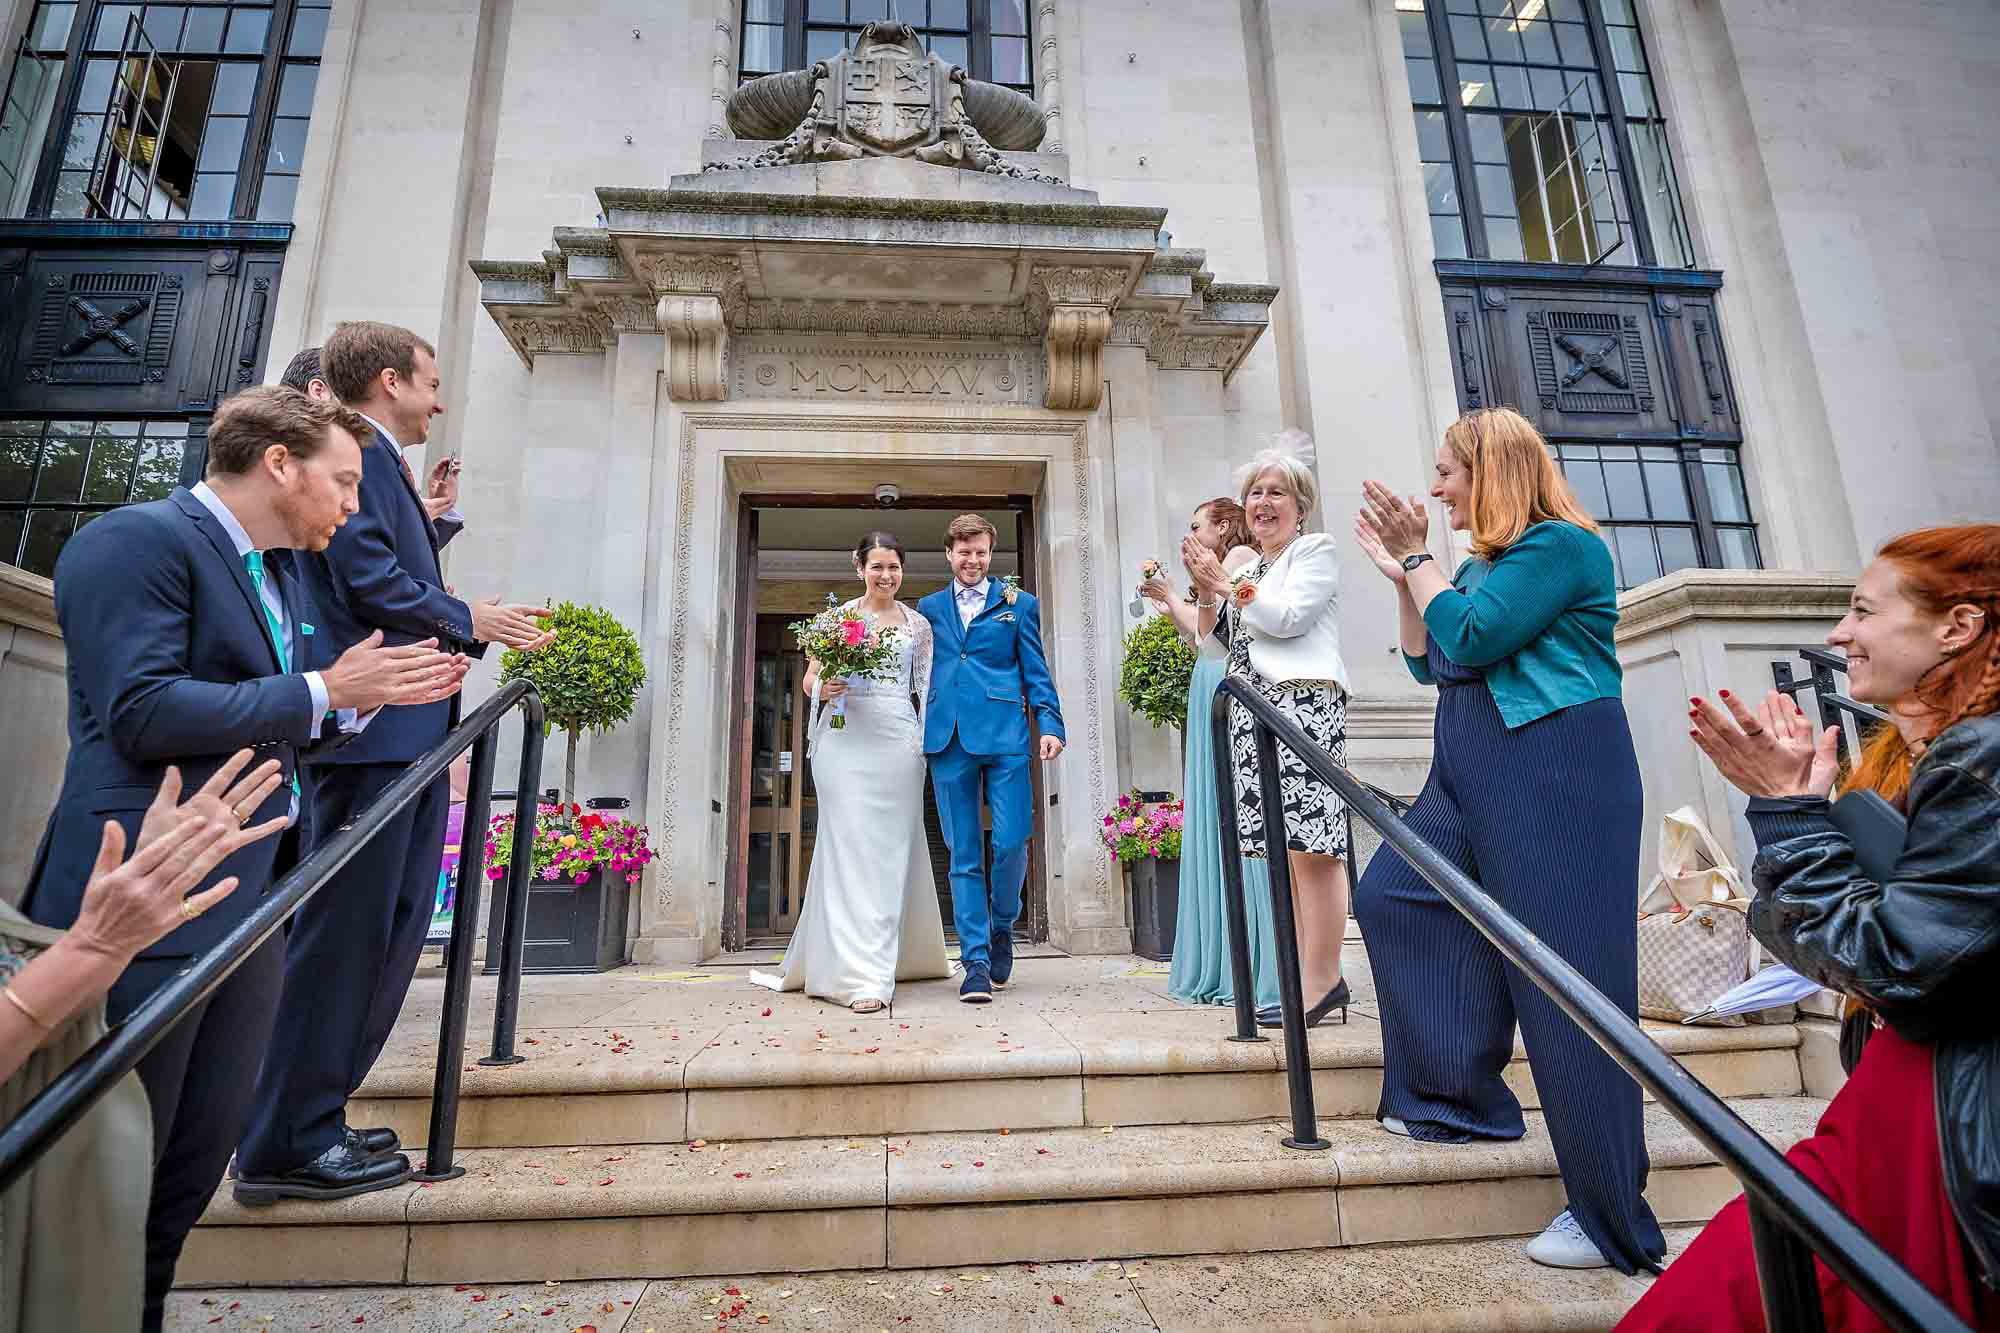 A newly married couple leaving Islington Town Hall with guests clapping them